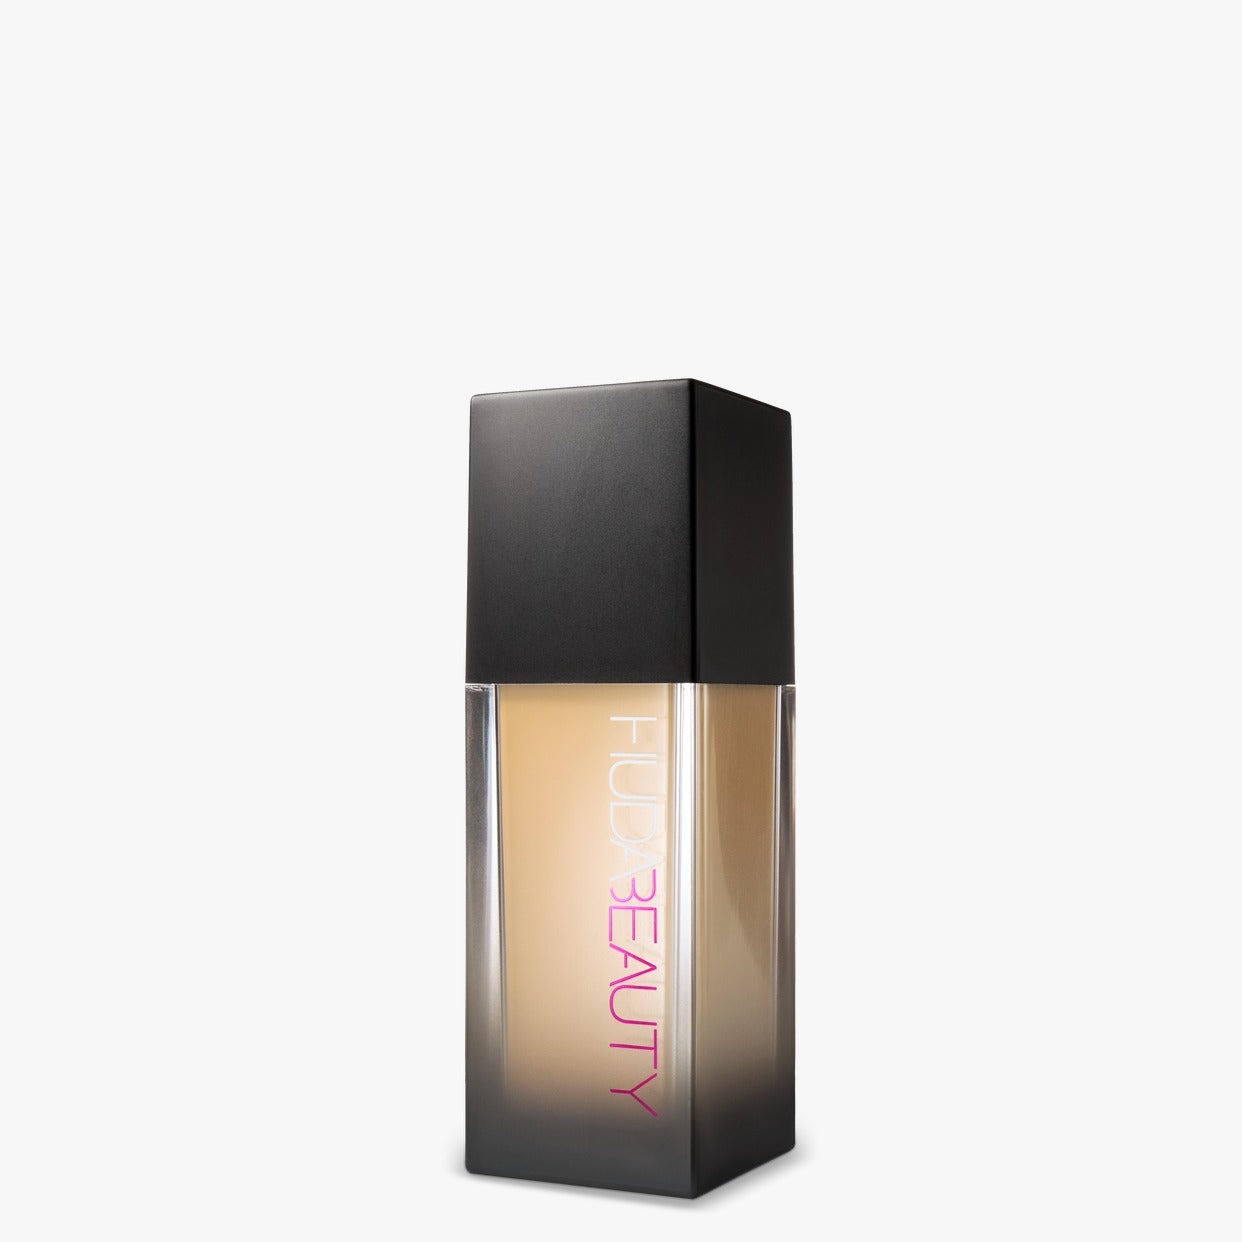 Huda beauty fauxfilter foundation cream brulee 150g